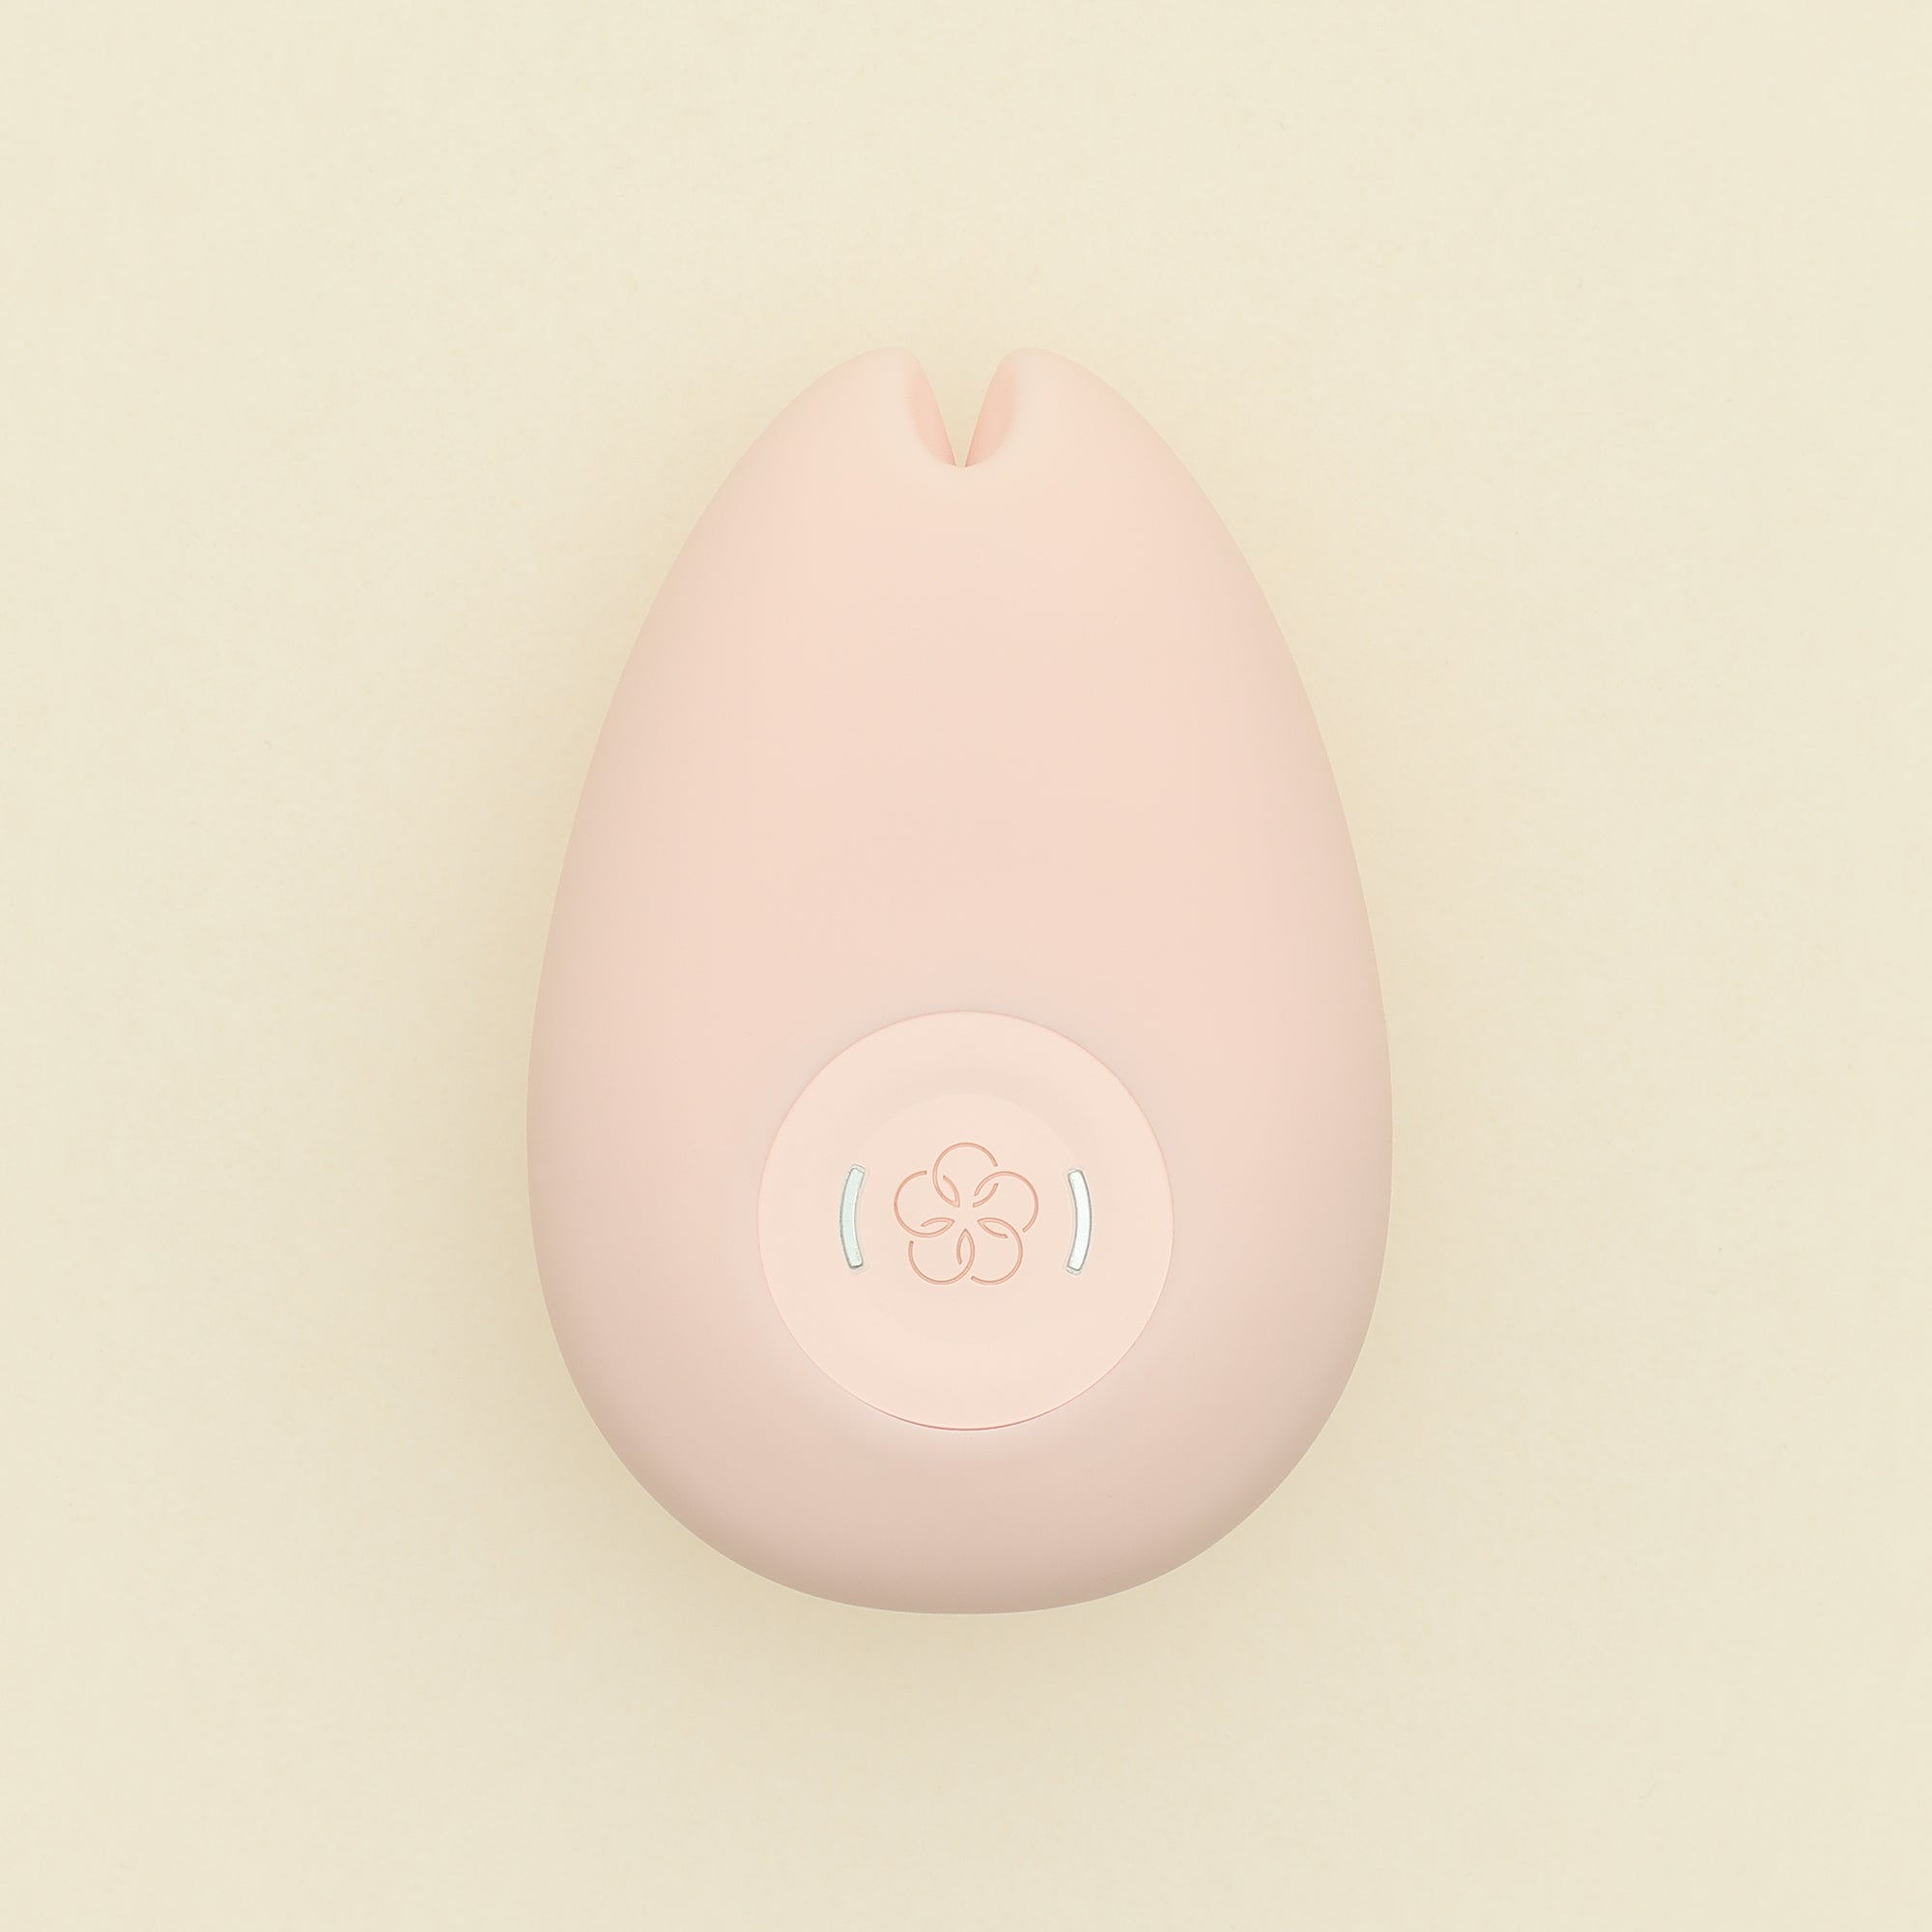 Iroha Sakura, a sleek and elegant female personal pleasure device. Sold by UK TENGA STORE, the design is inspired by the delicate beauty of a cherry blossom, with its soft pink color and unique shape. The product is thoughtfully crafted to provide comfort and satisfaction